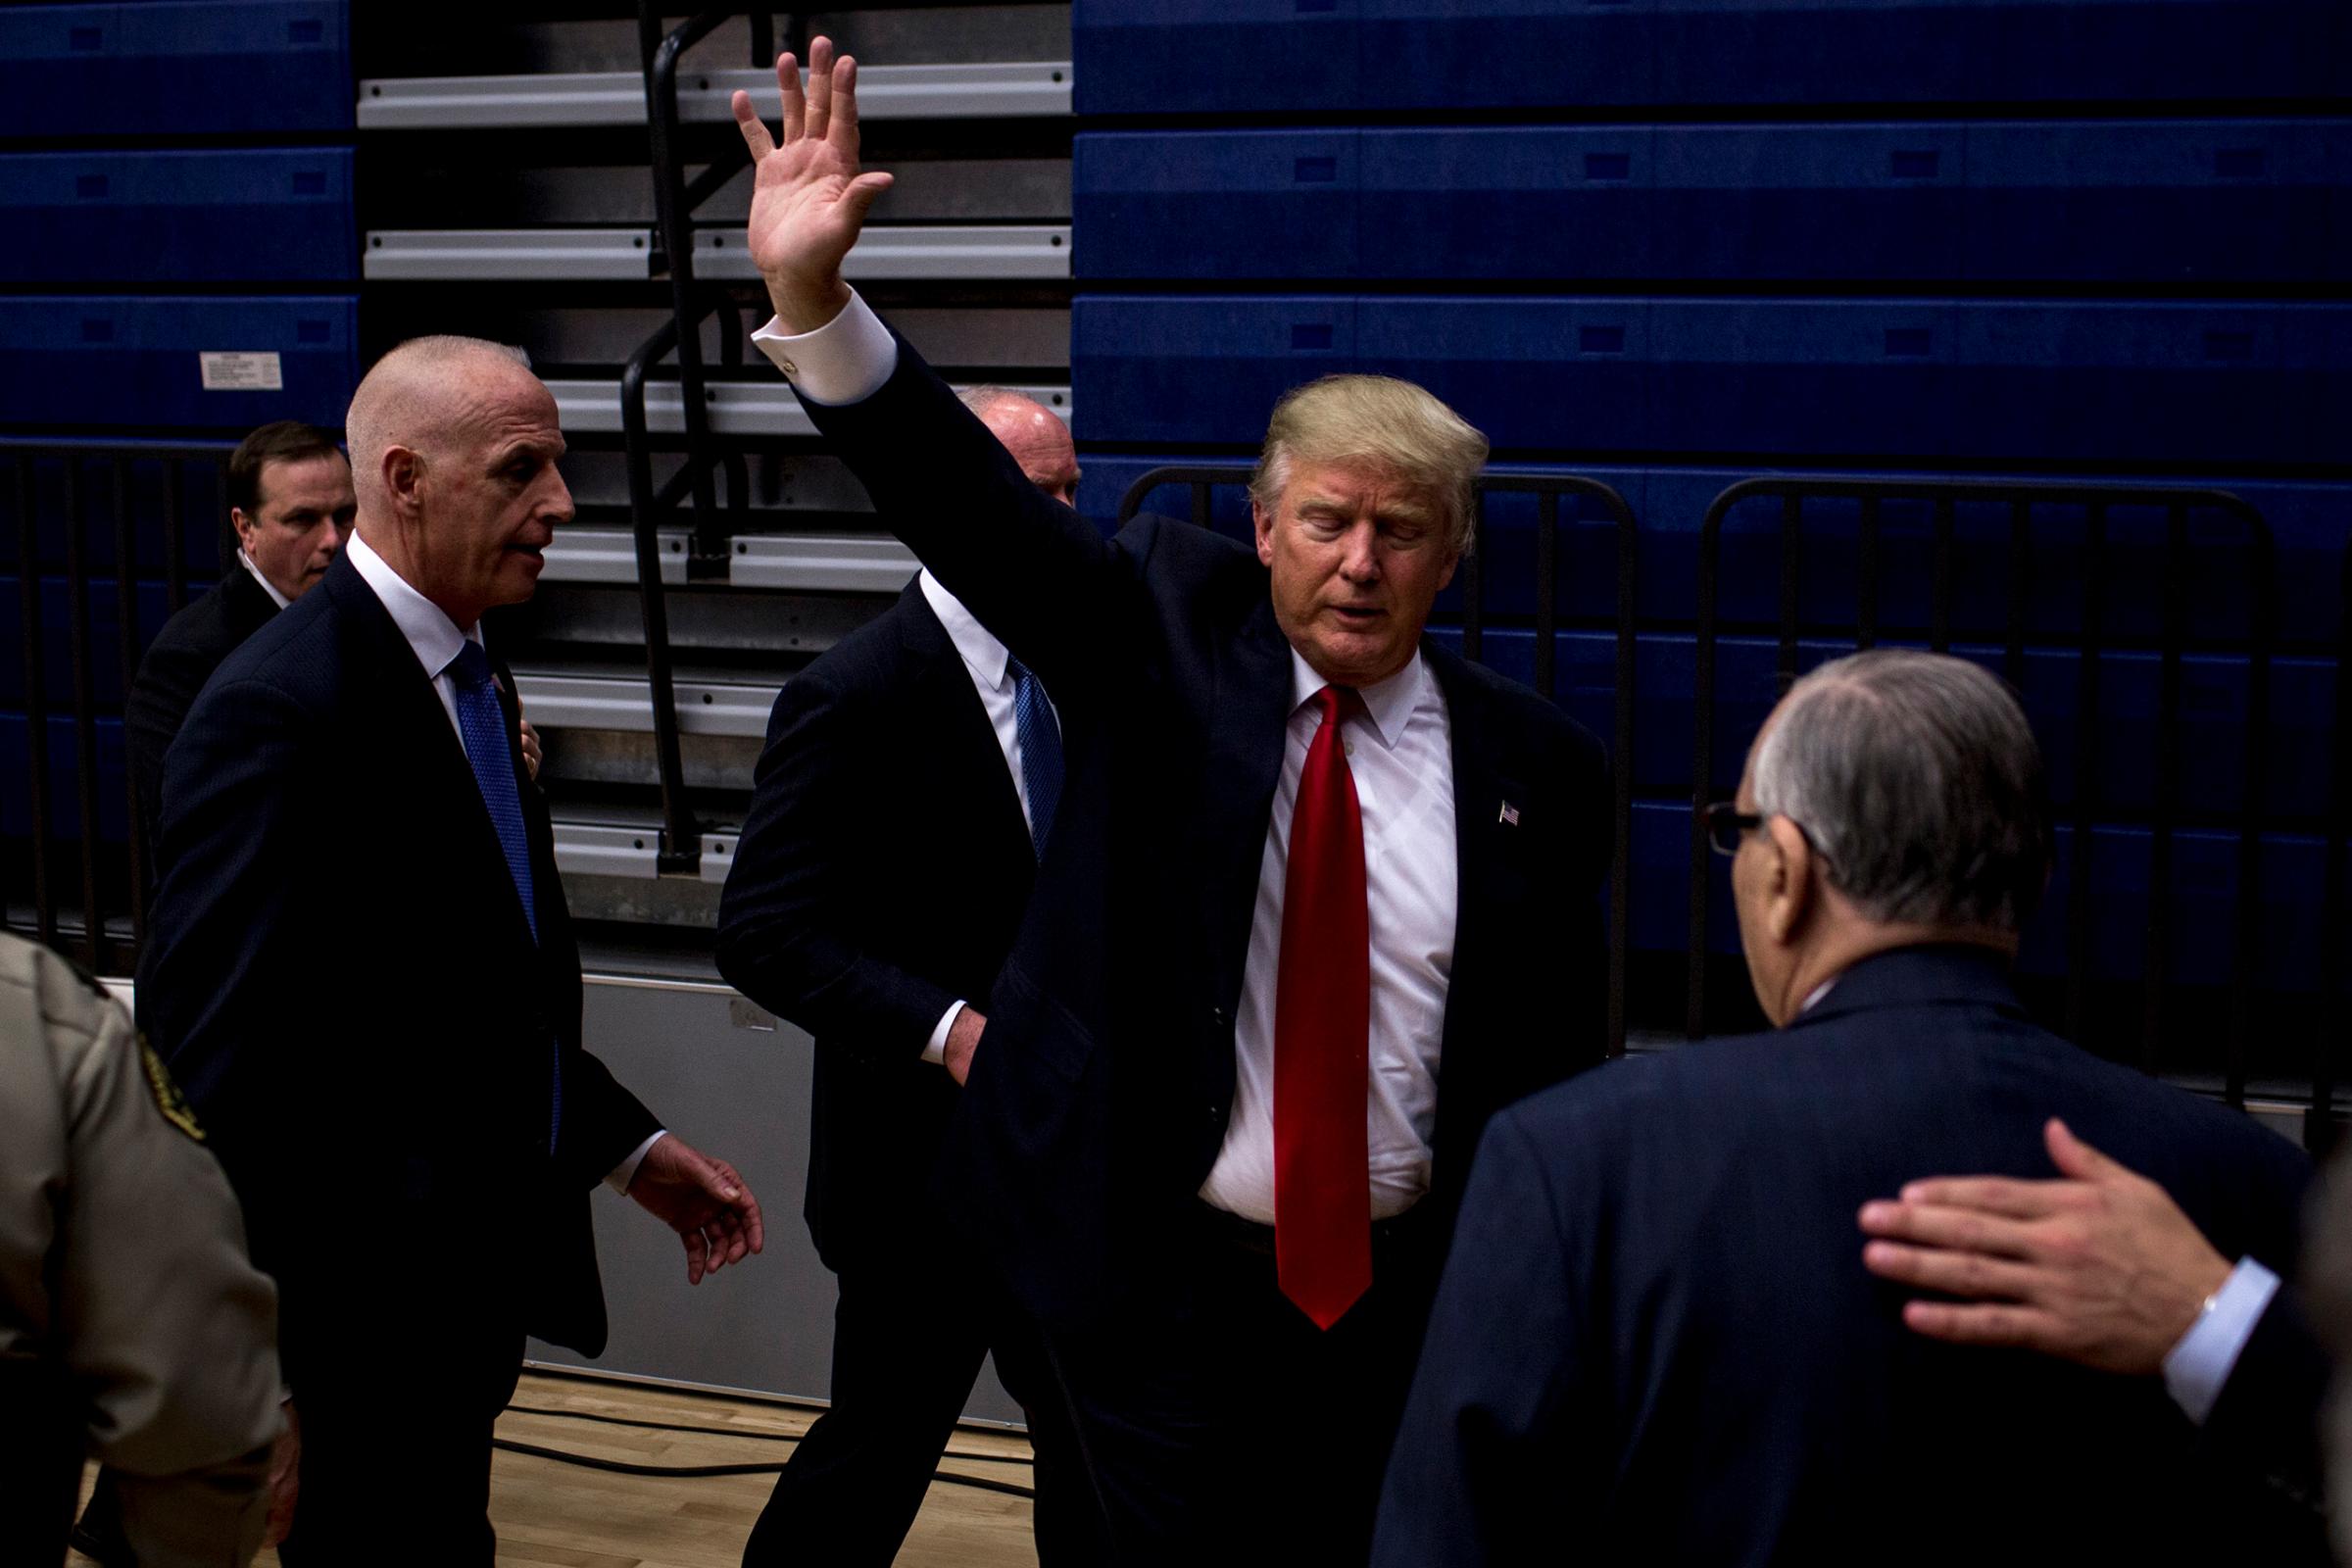 January 26, 2016. Des Moines Iowa. A Donald Trump Rally at Marshalltown Community School District - Roundhouse Gymnasium. As Iowa's Caucuses approach, candidates converge on the state for campaign events. On Monday evening democratic candidates Clinton, O'Malley and Sanders held a Town Hall sponsored by CCN at Drake University in Des Moines. (Natalie Keyssar)